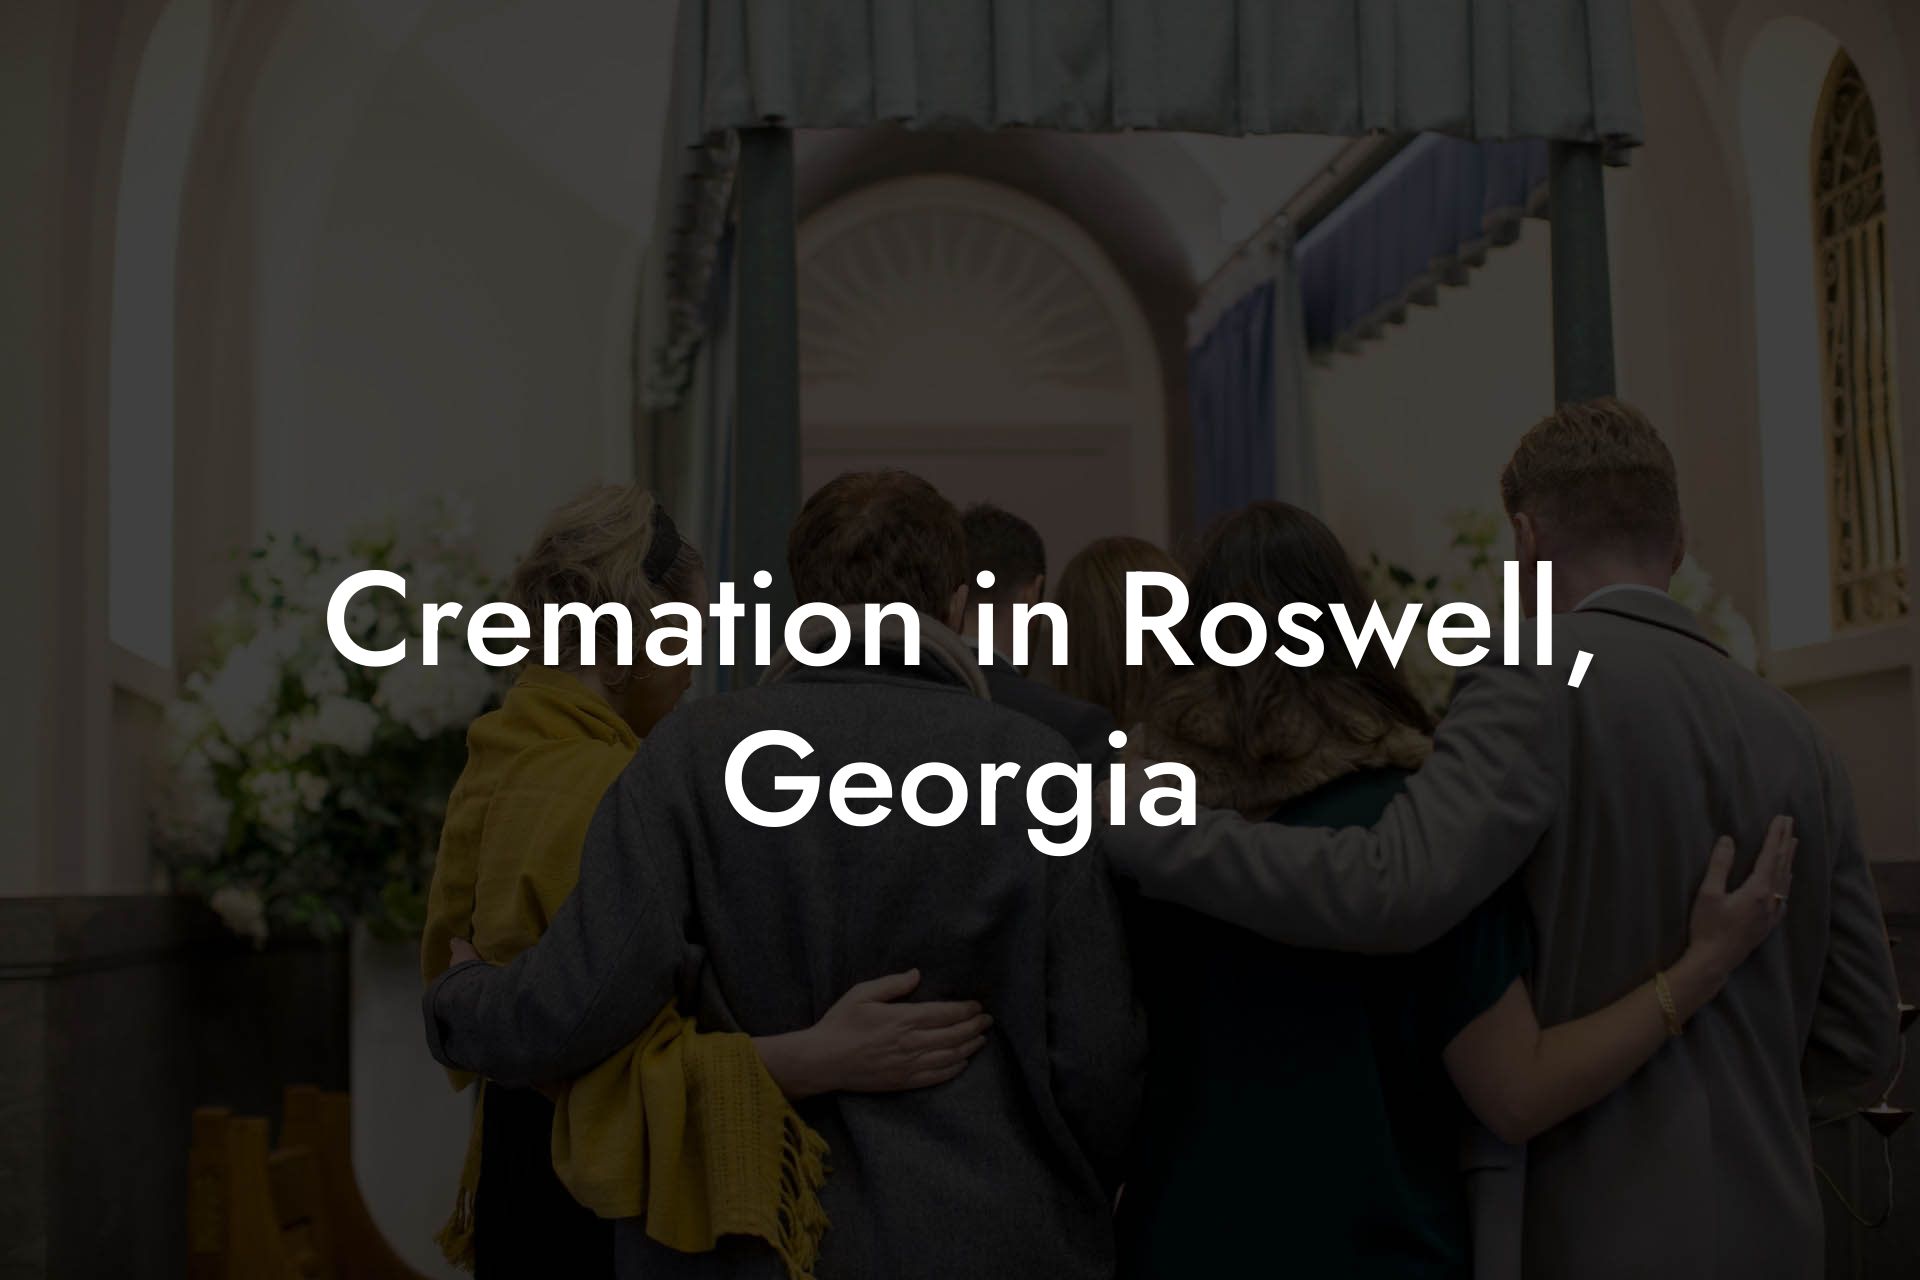 Cremation in Roswell, Georgia